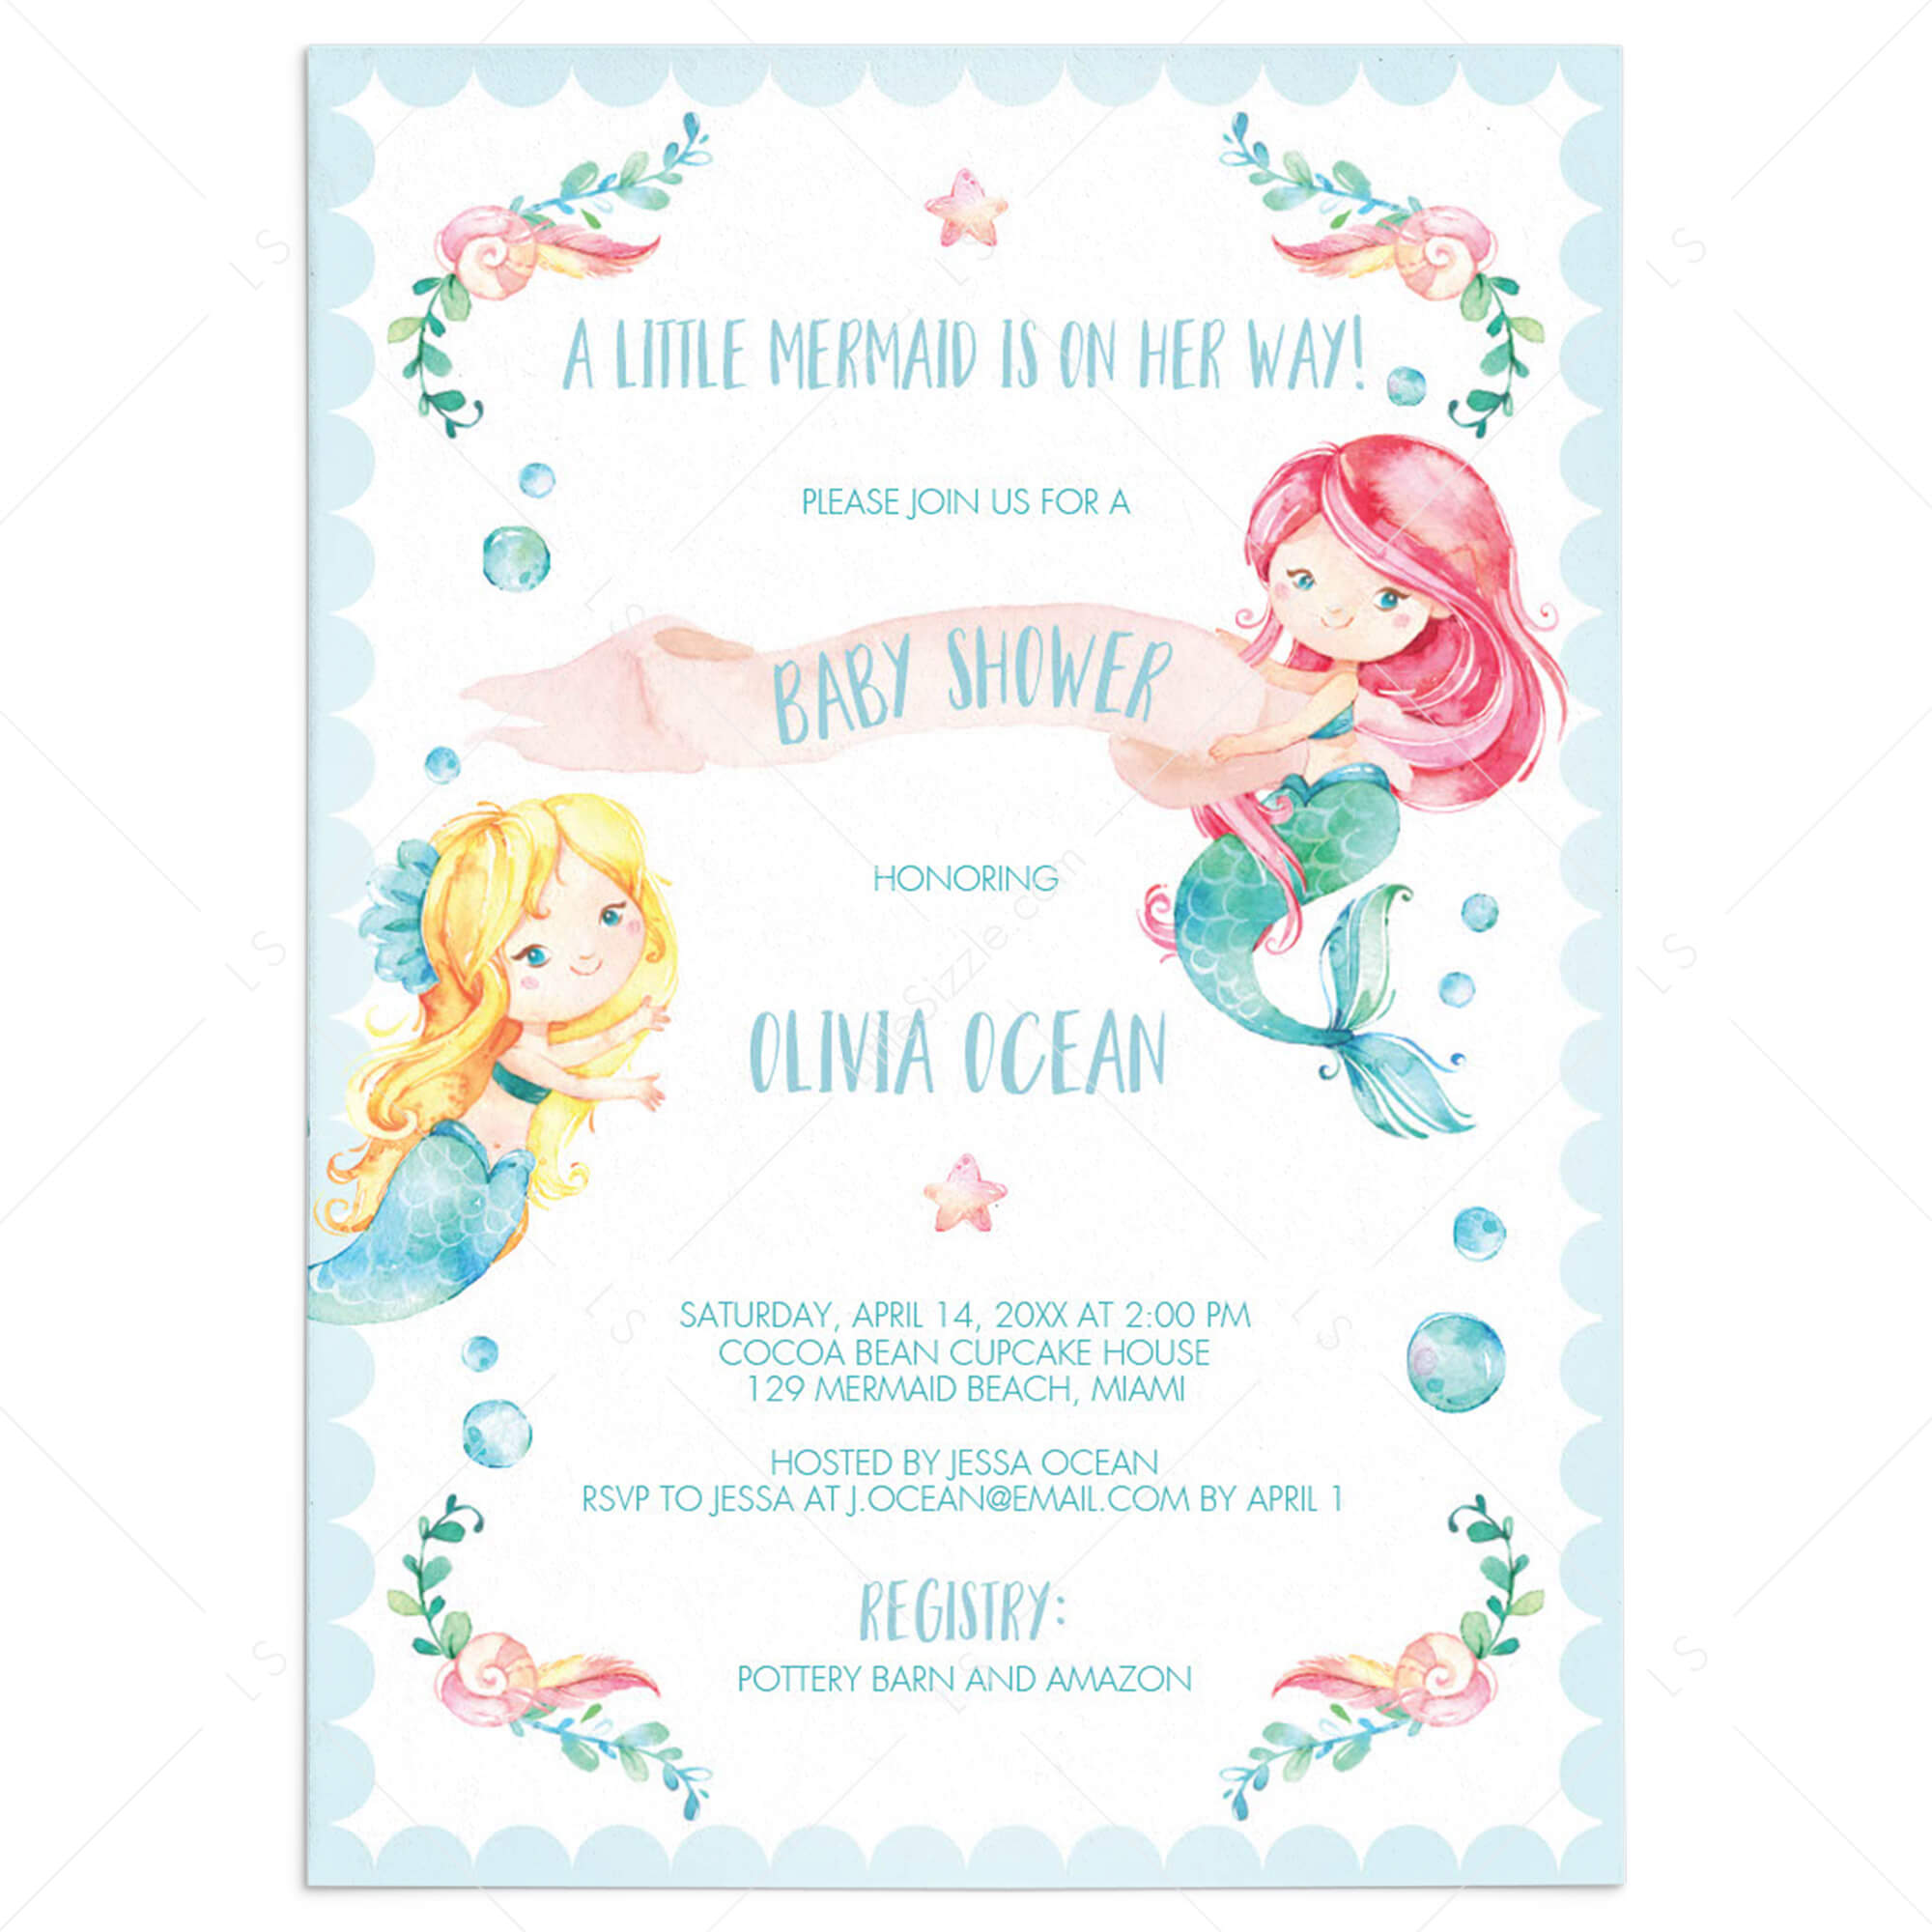 Mermaid Baby Shower Invitation Template Watercolor by LittleSizzle